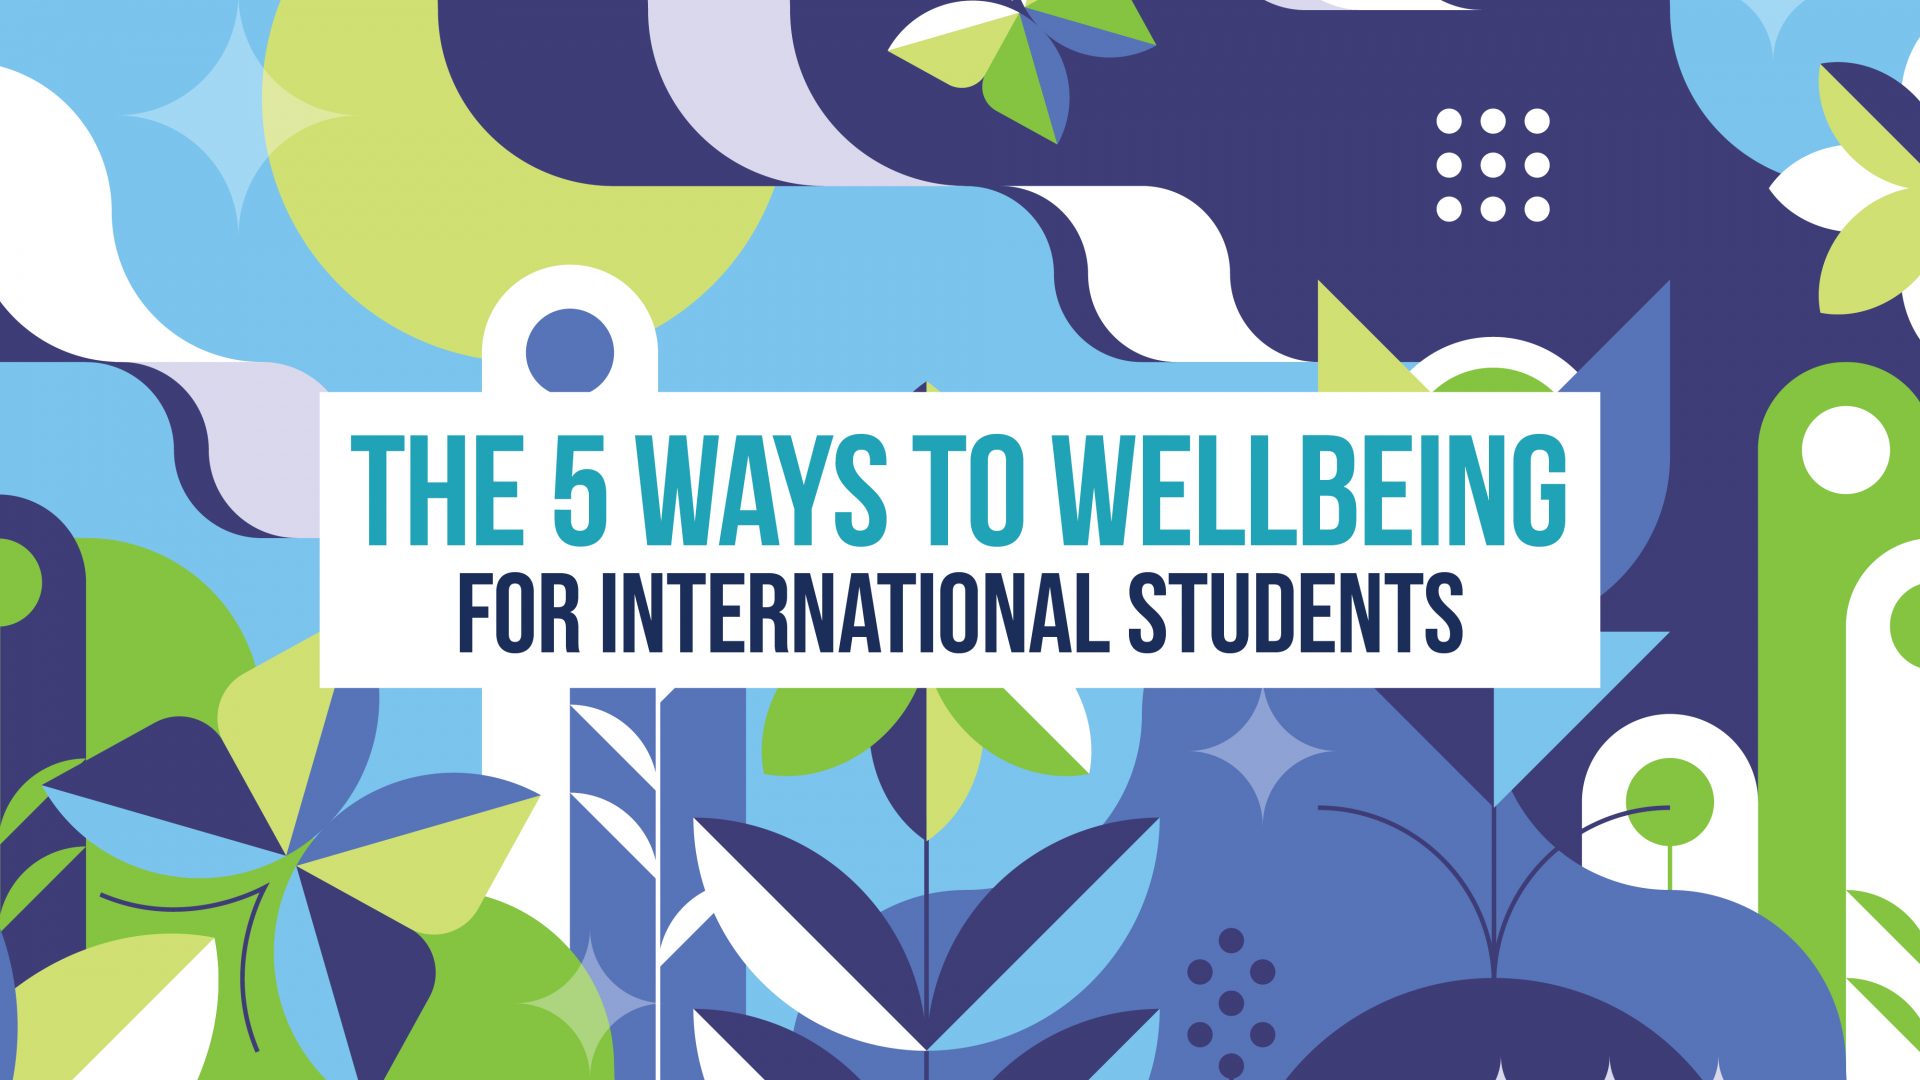 5 ways to well being for international students